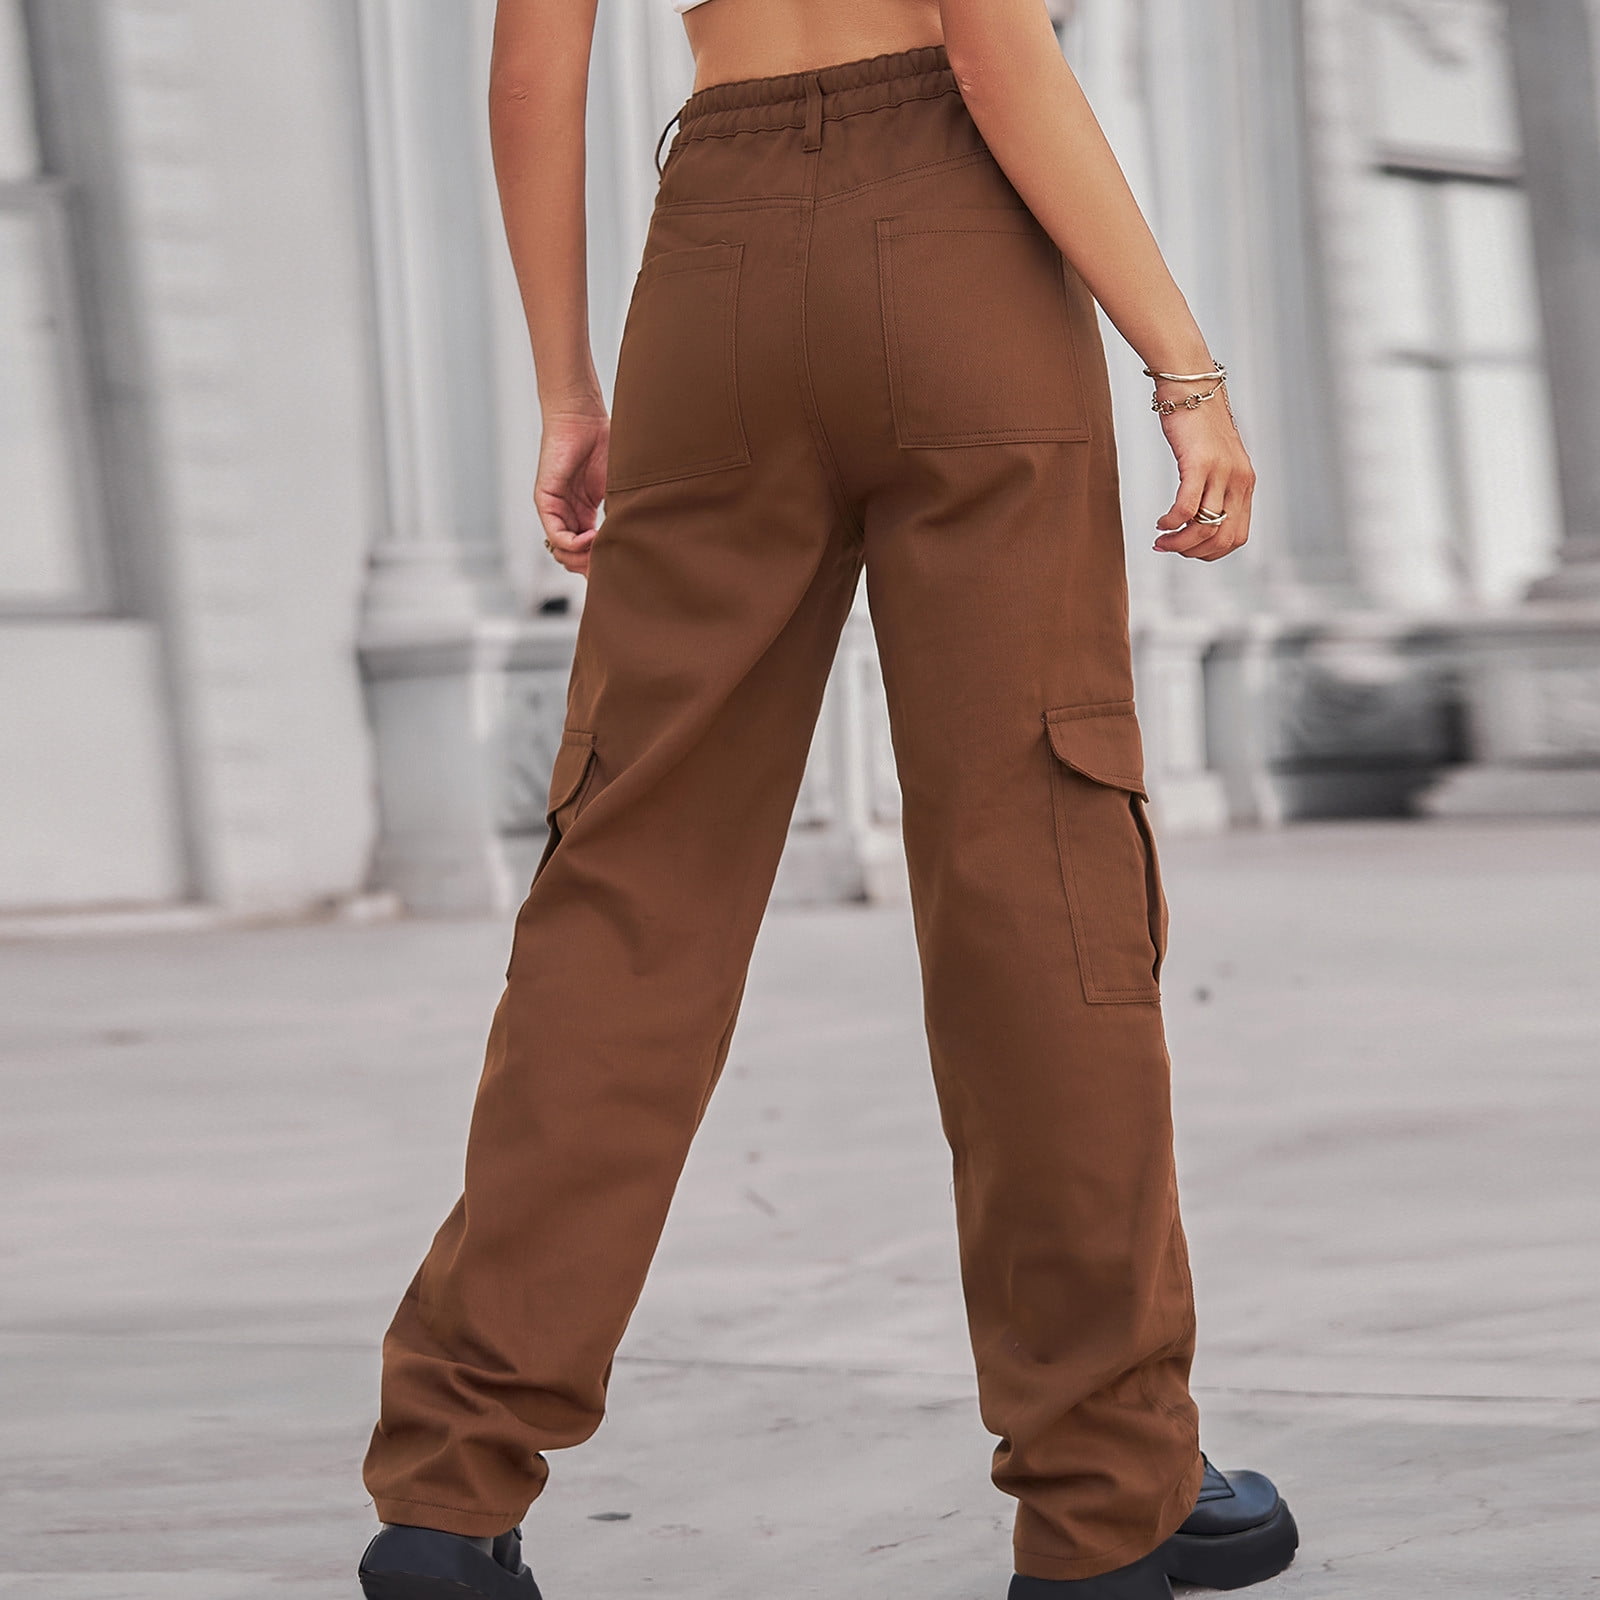  Qwent Womens Dress Pants Casual Women's Solid Cargo Pants Belt  Casual Zipper Pocket Without Design Color Yoga Pants Linen Brown :  Clothing, Shoes & Jewelry